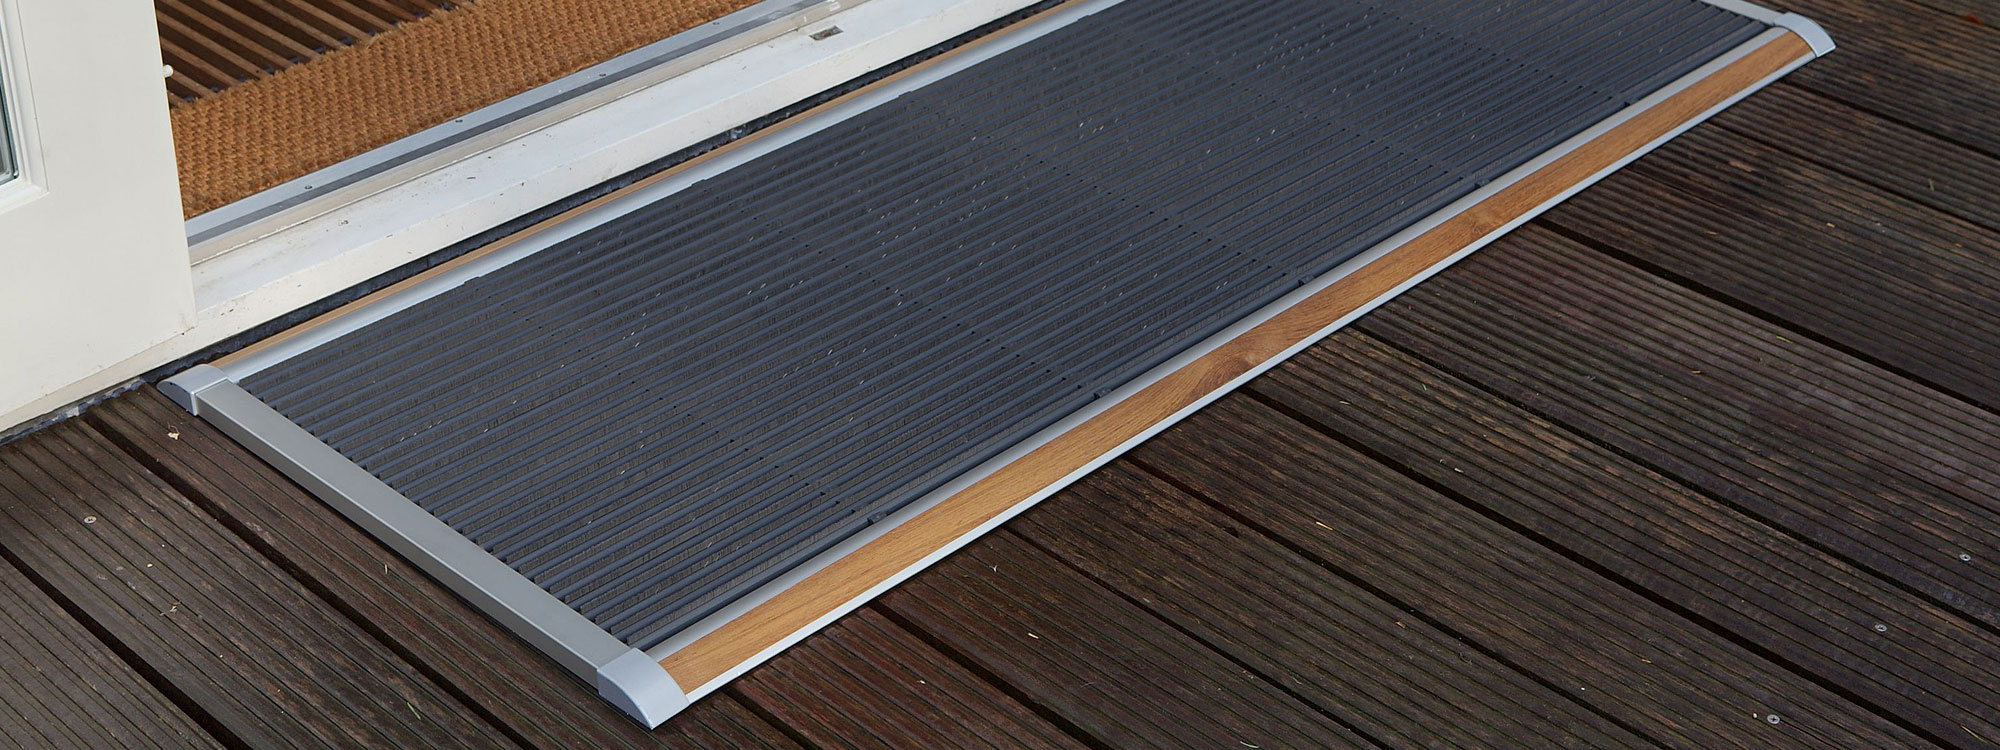 Image of RiZZ The New Standard modern door mat with anodized silver aluminium frame with teak inlay